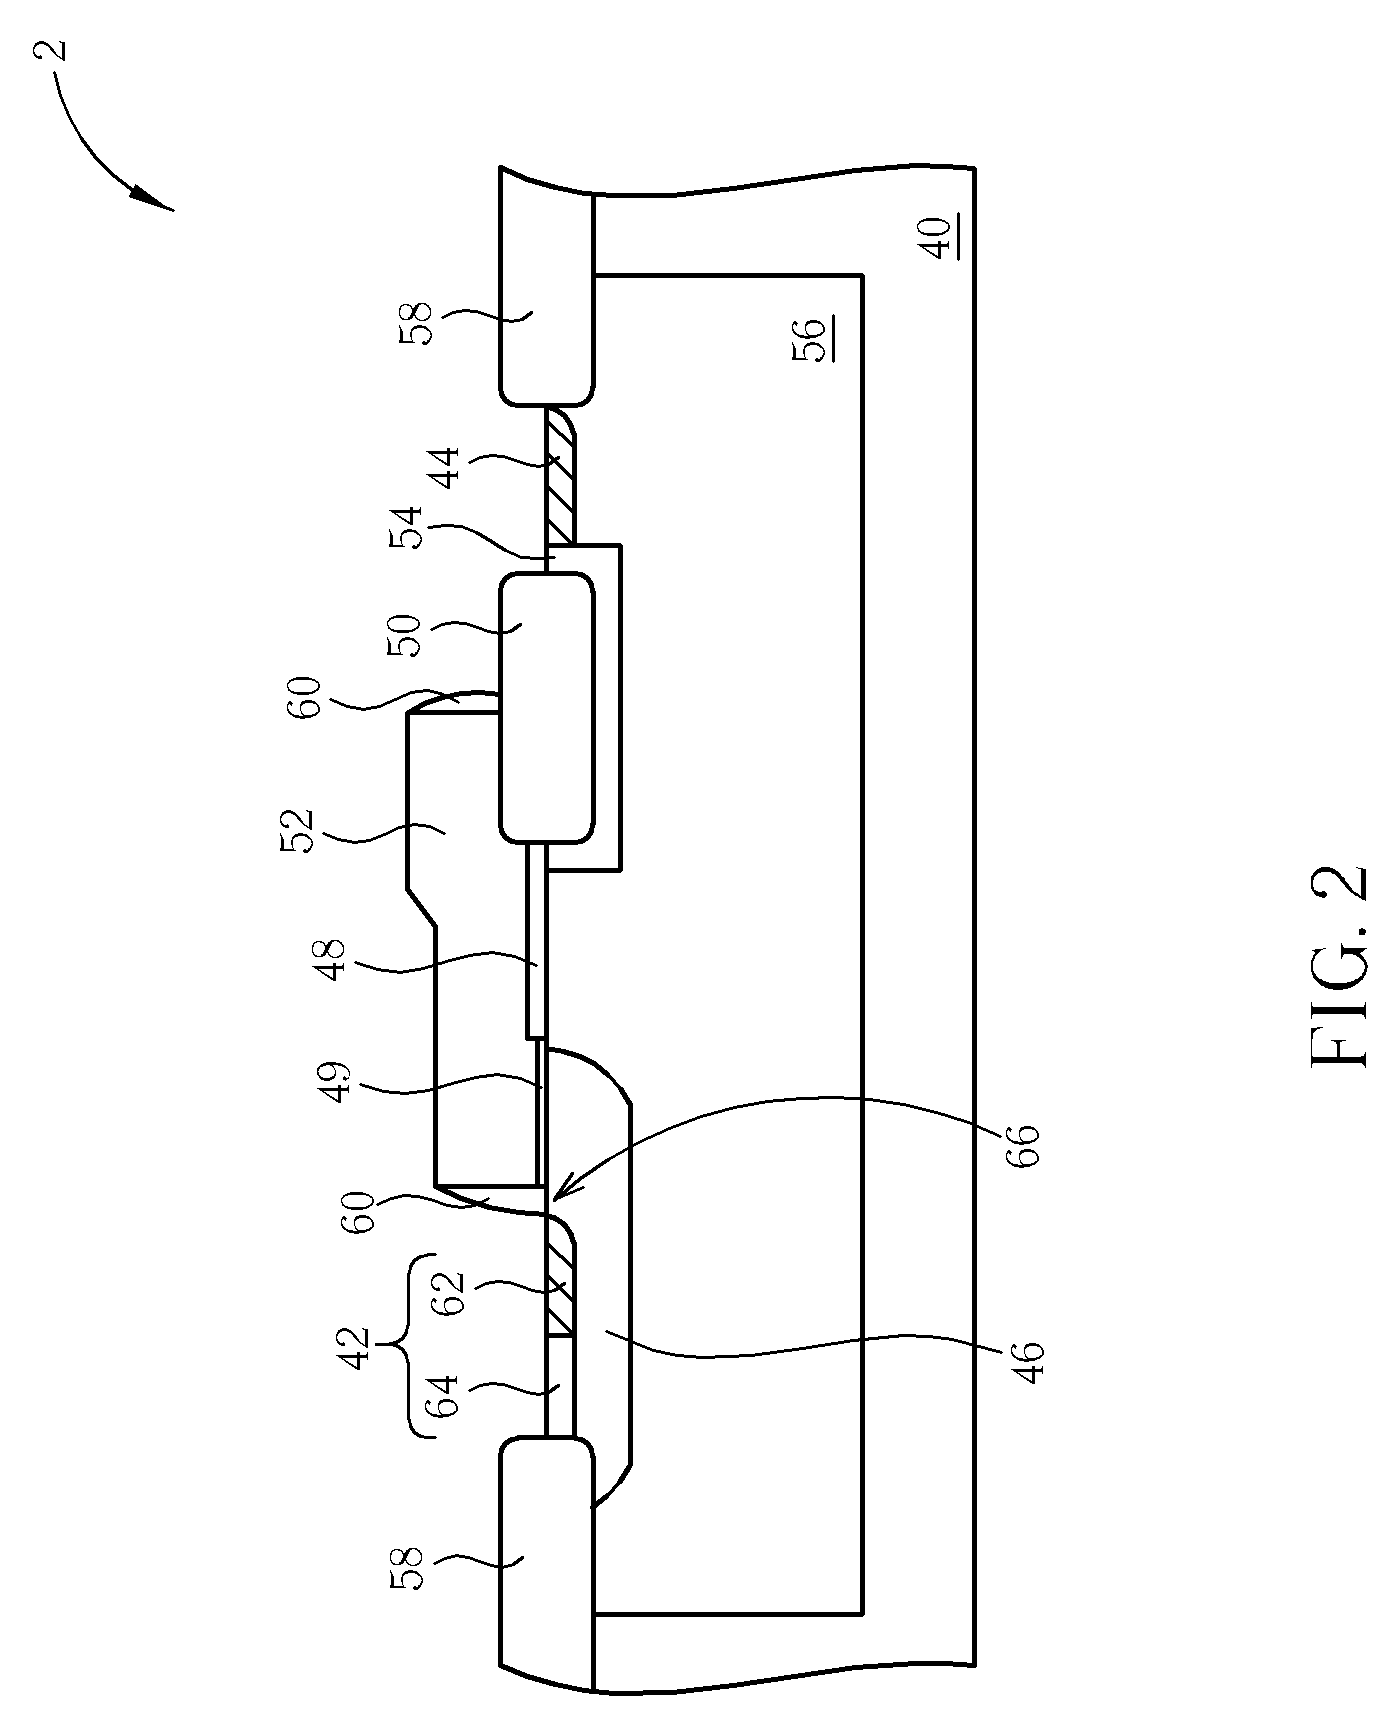 Laterally diffused metal-oxide-semiconductor device and method of making the same